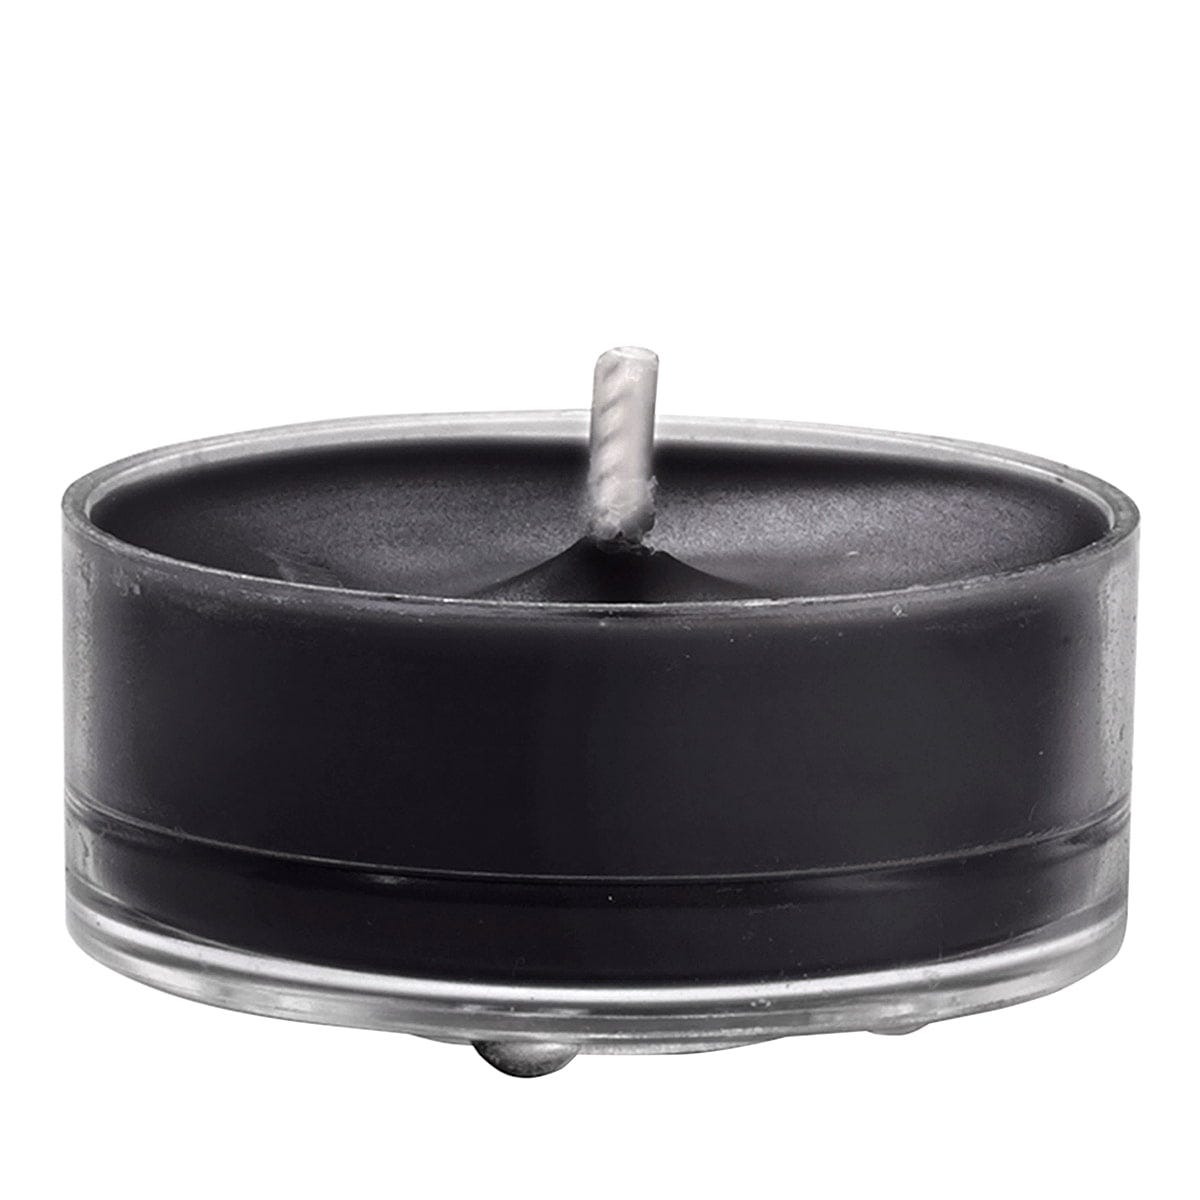 Fig Fatale Universal Tealight® Candles - PartyLite US